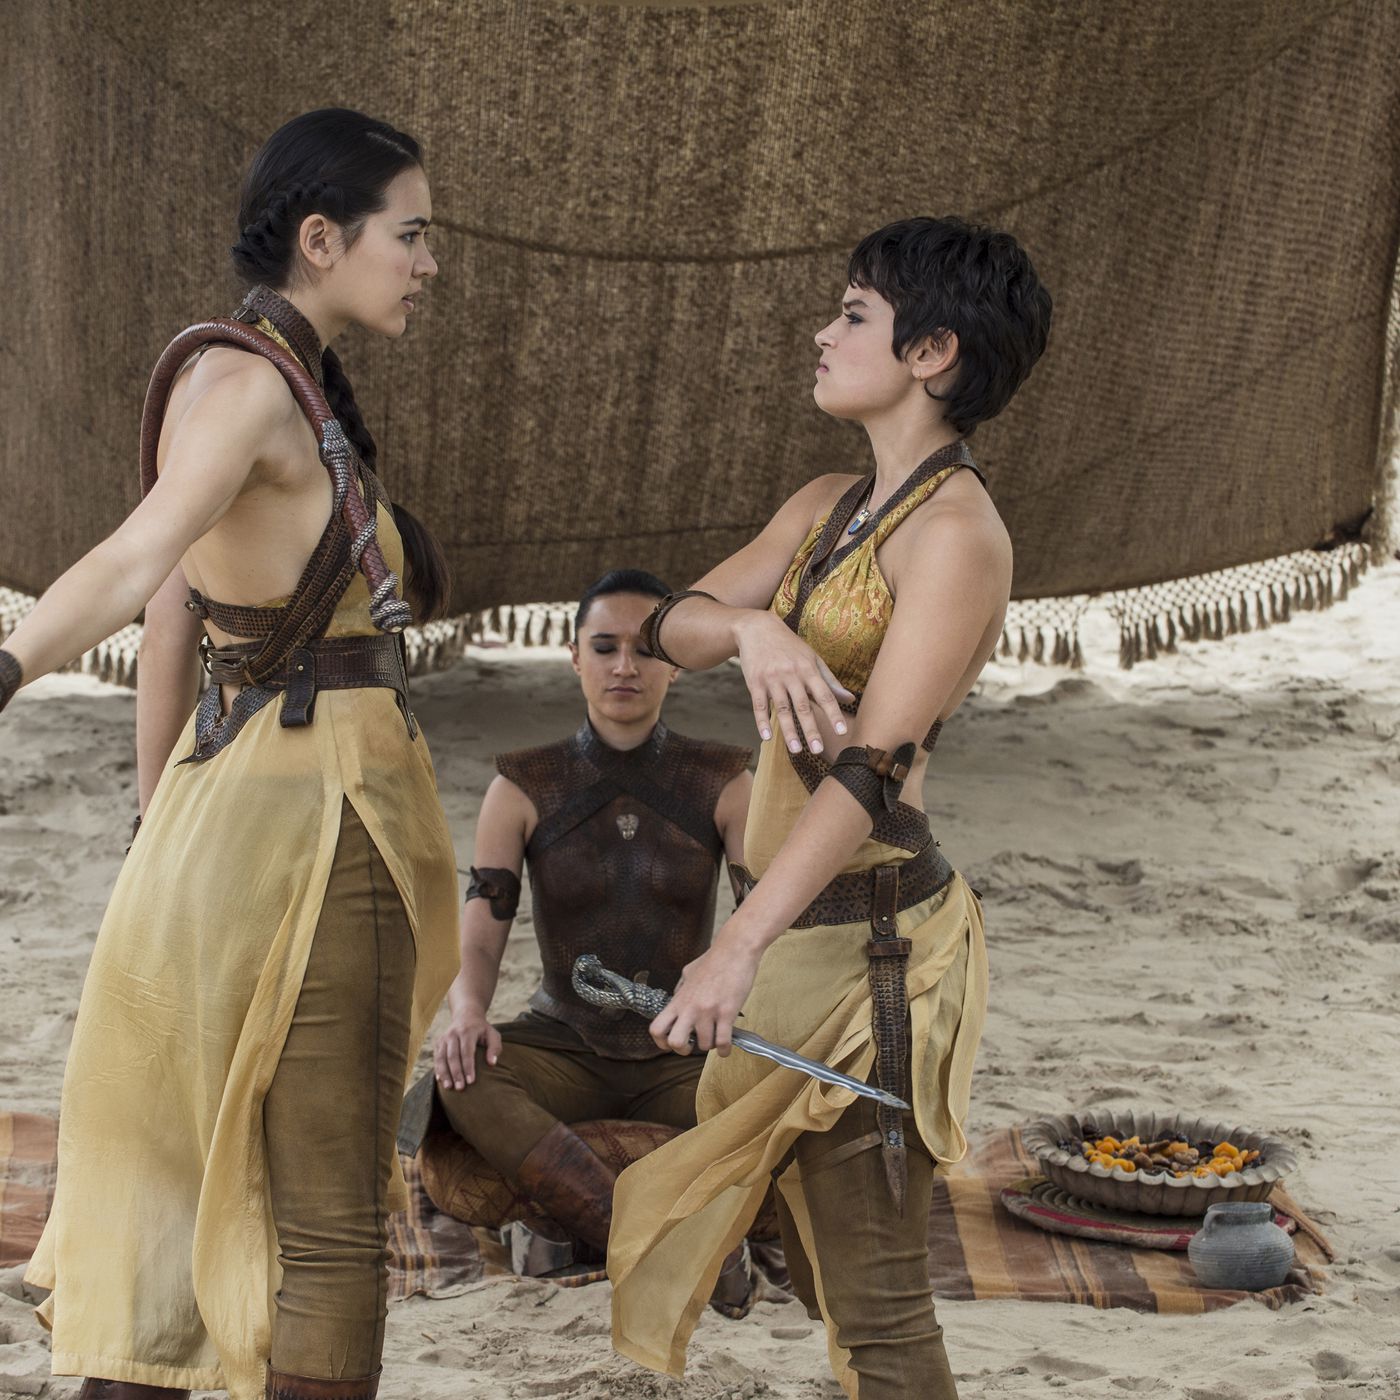 alisha chan recommends got sand snakes nude pic